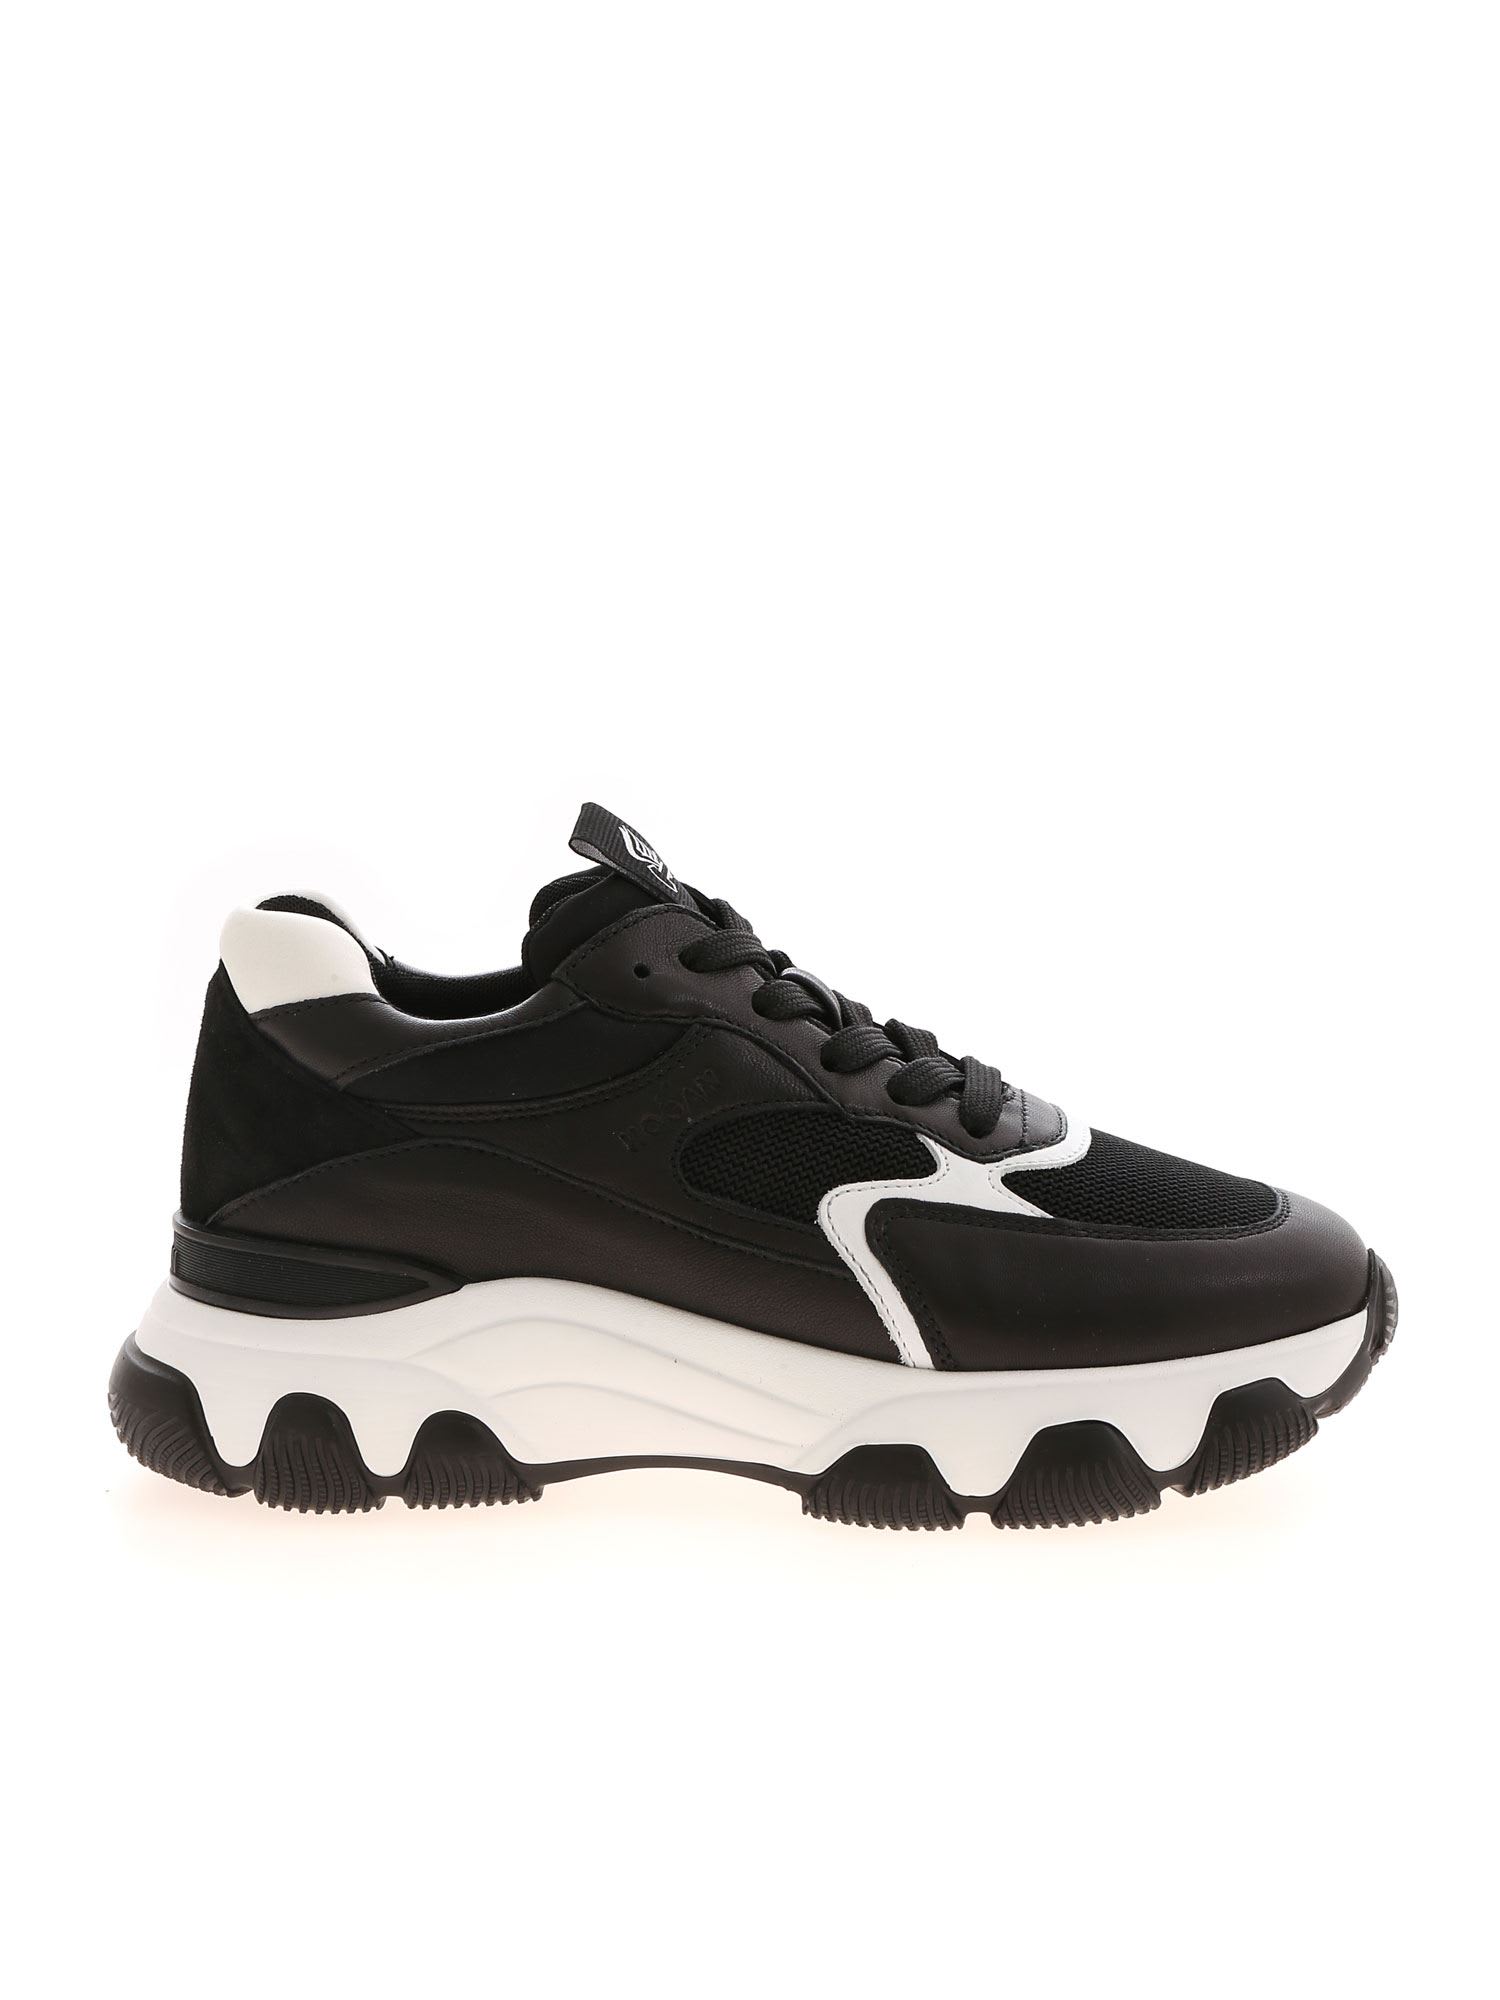 Hogan Hyperactive Leather And Fabric Sneakers In Black